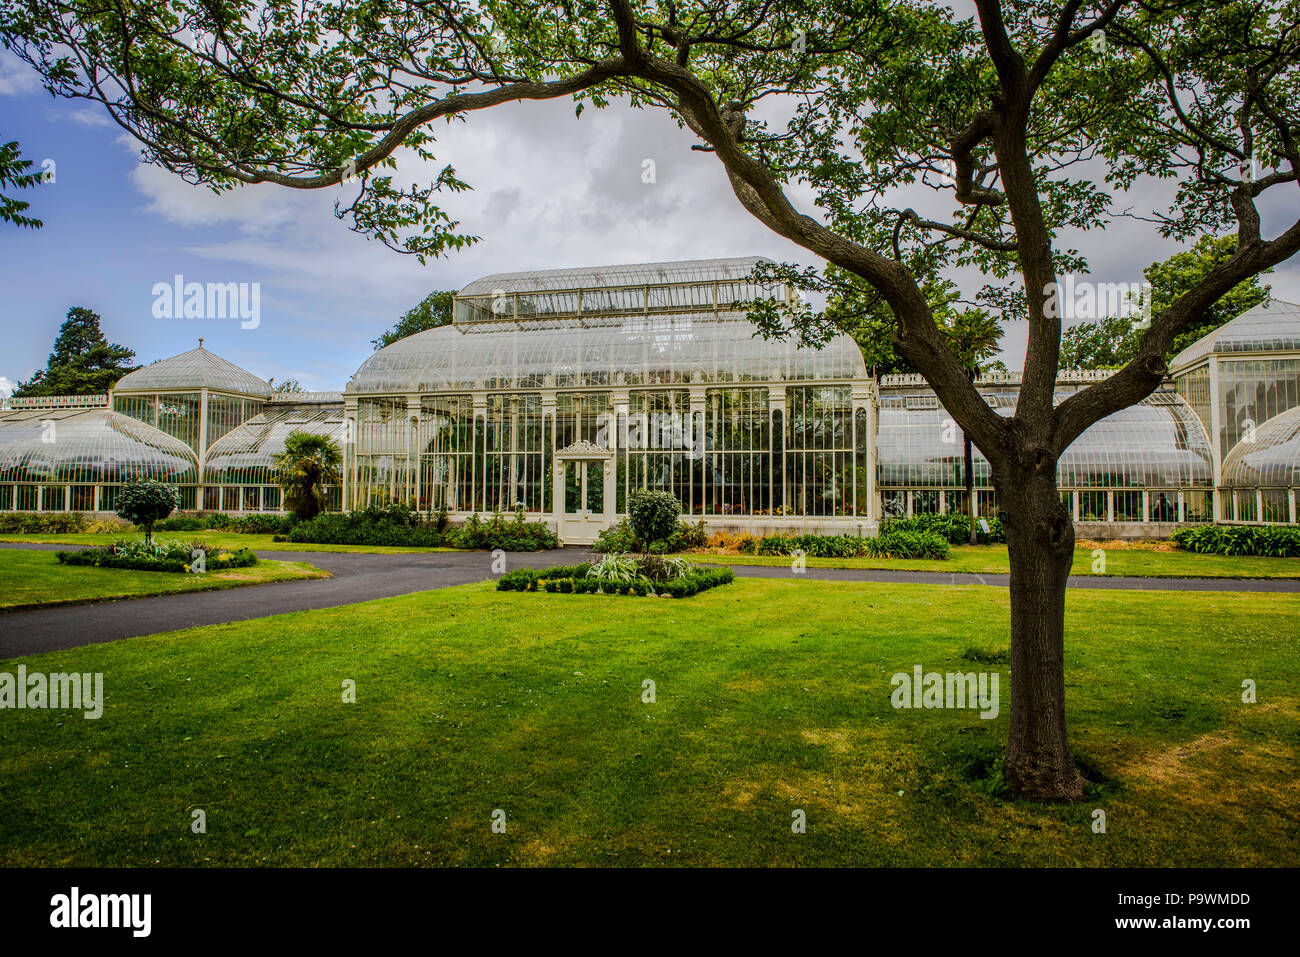 Greenhouse from 1849 in the botanical garden, also called Curvilinear Range, architect Richard Turner, Dublin, Ireland Stock Photo